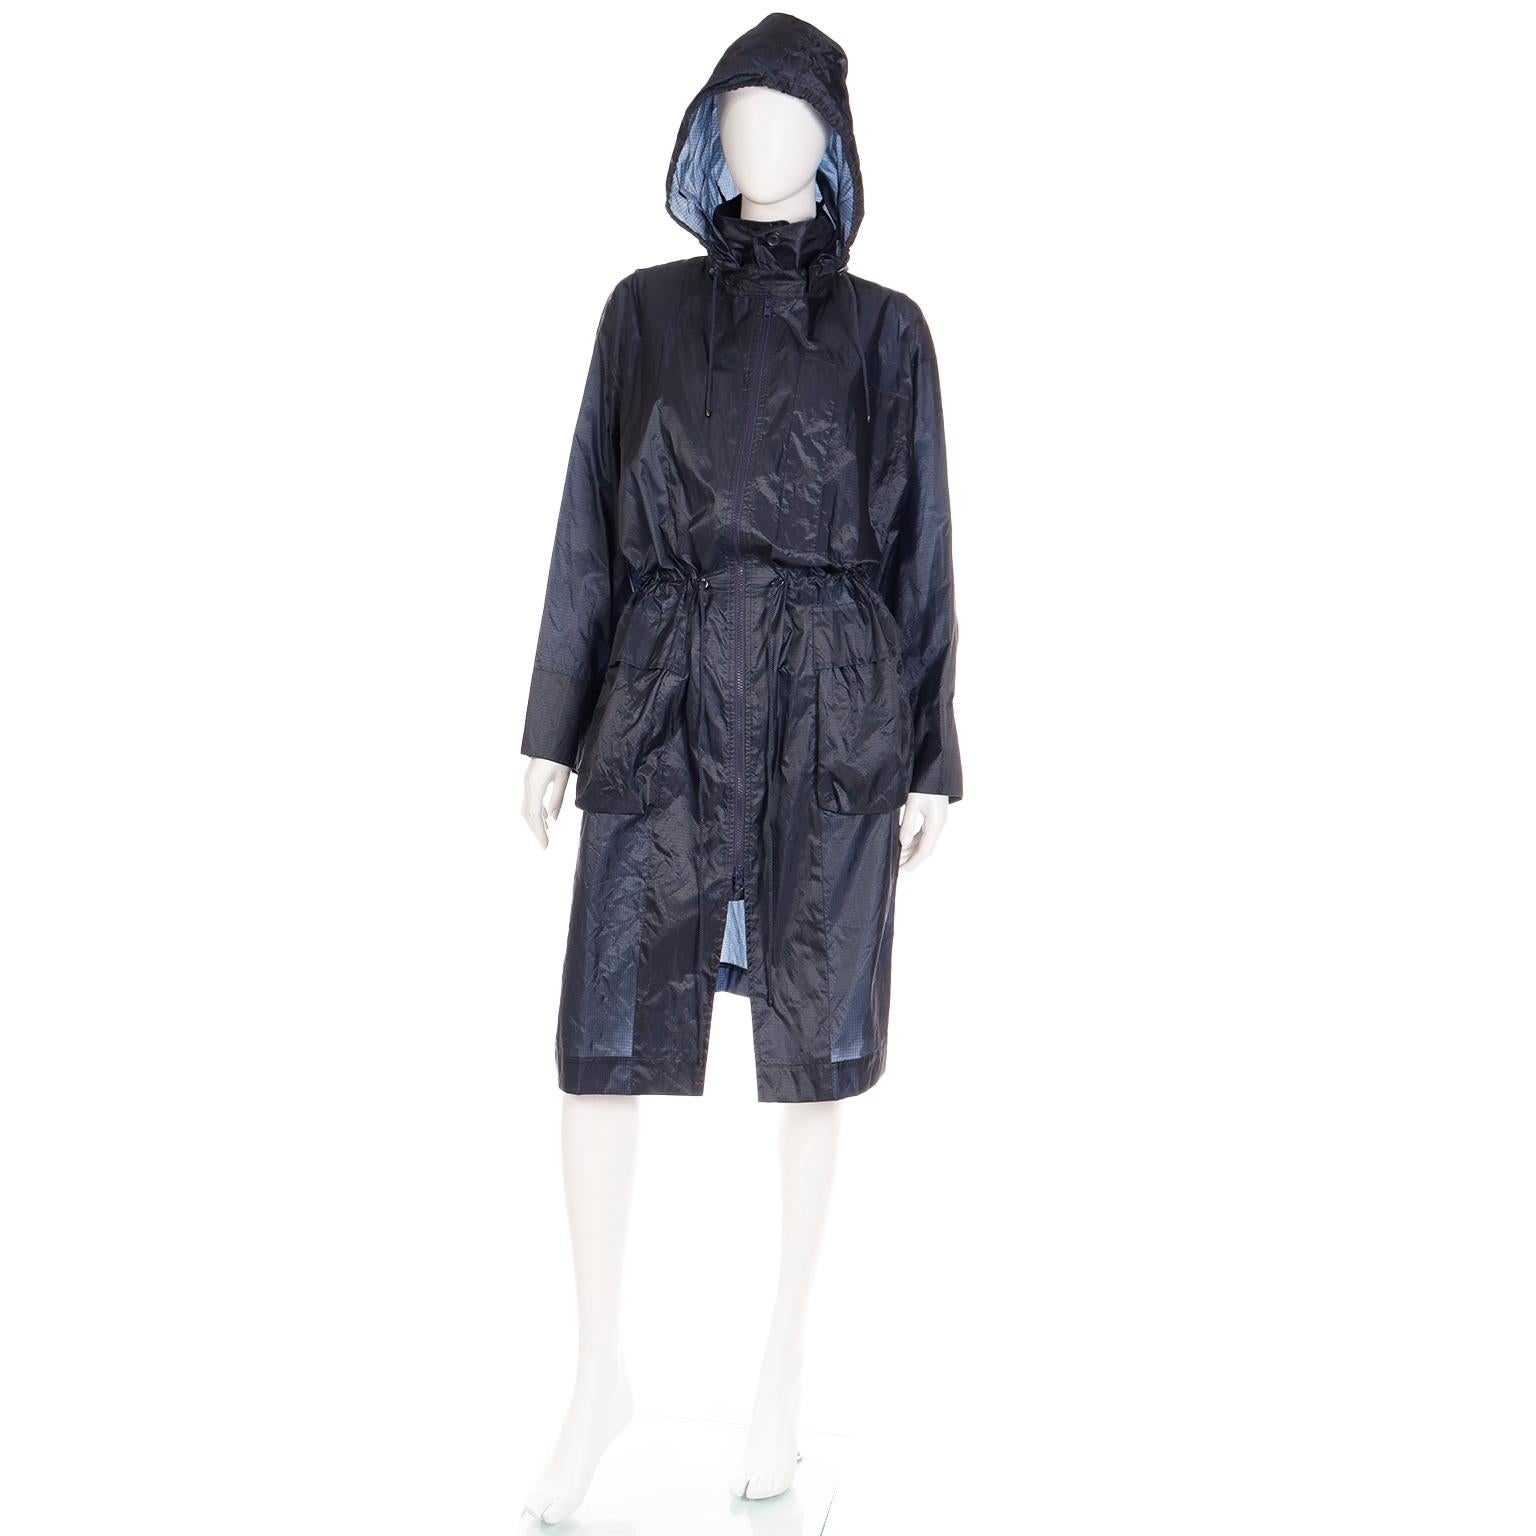 This vintage Issey Miyake 1990's nylon windcoat is one of the designer's signature pieces. His now iconic raincoats were so popular that he created the windcoat line. These billowing oversized raincoats were famously photographed in 1987 by Irving